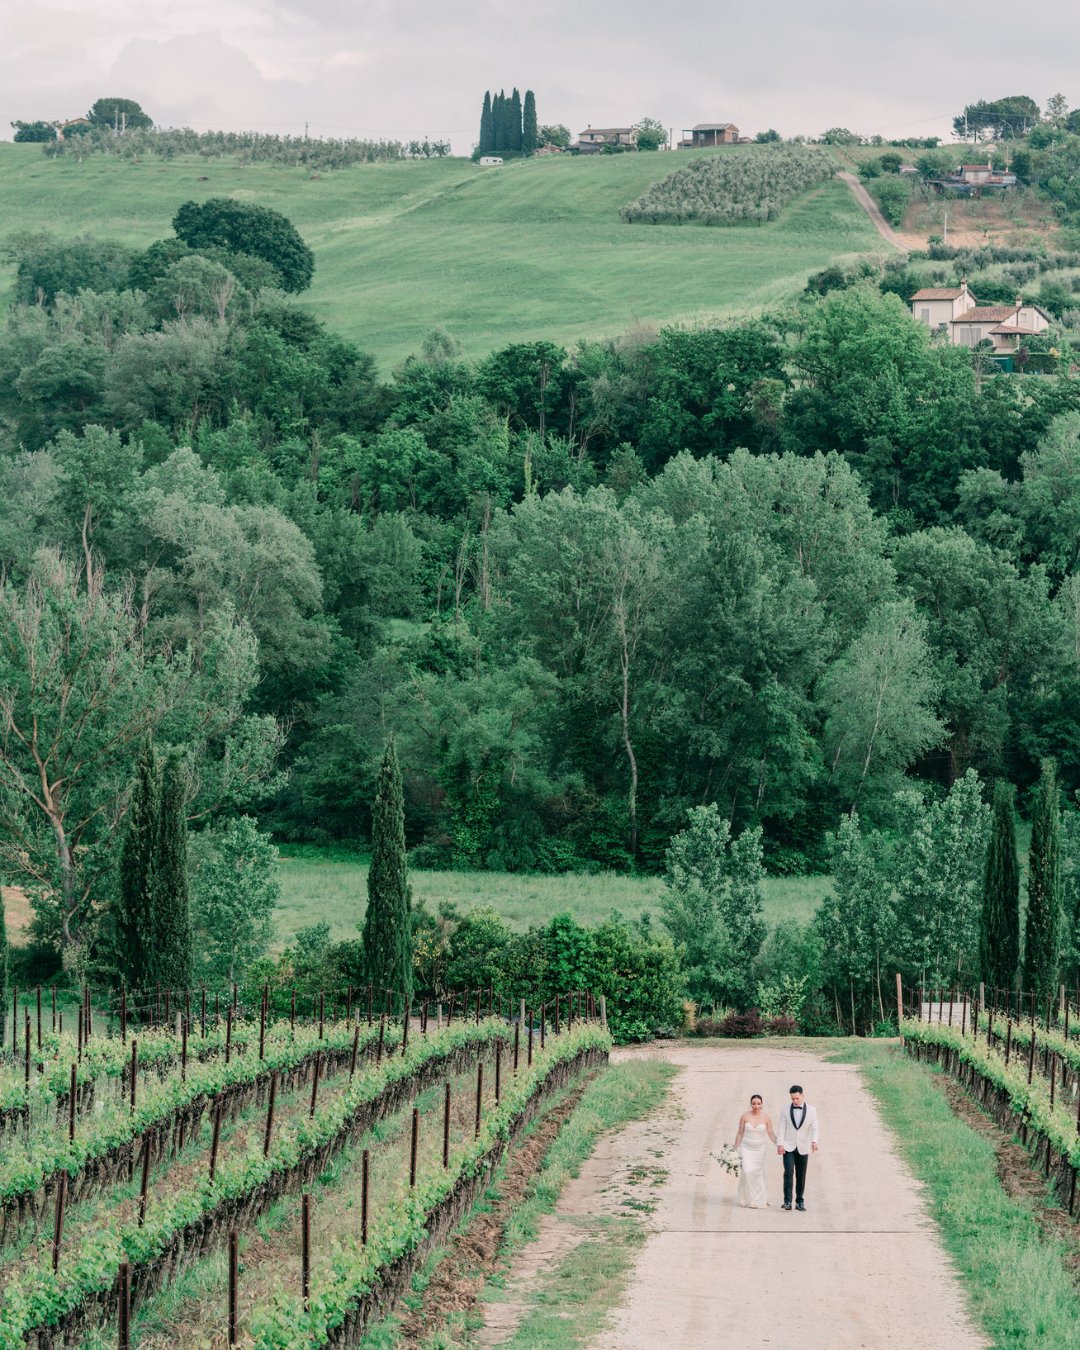 A couple walks hand in hand down a vineyard path, surrounded by lush green fields and trees, with rolling hills in the background.